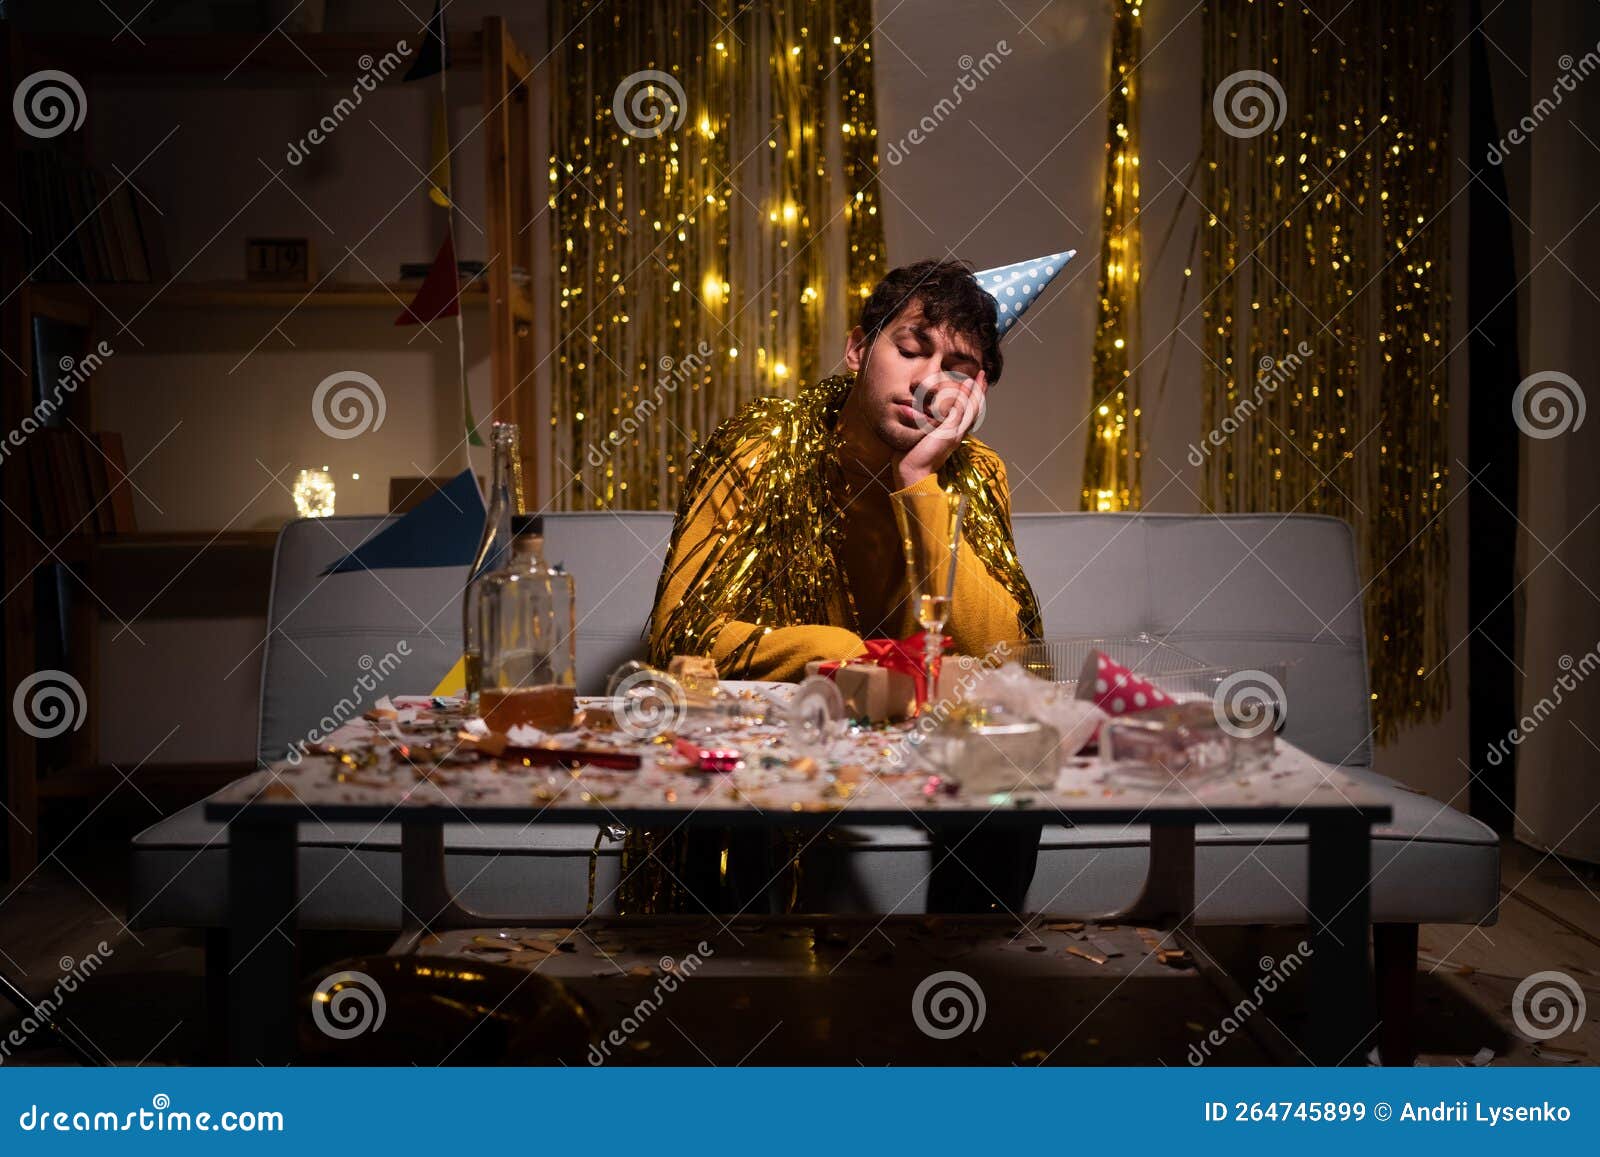 Tired Drunk Man after Party at Home Sitting on Sofa. Stock Image ...